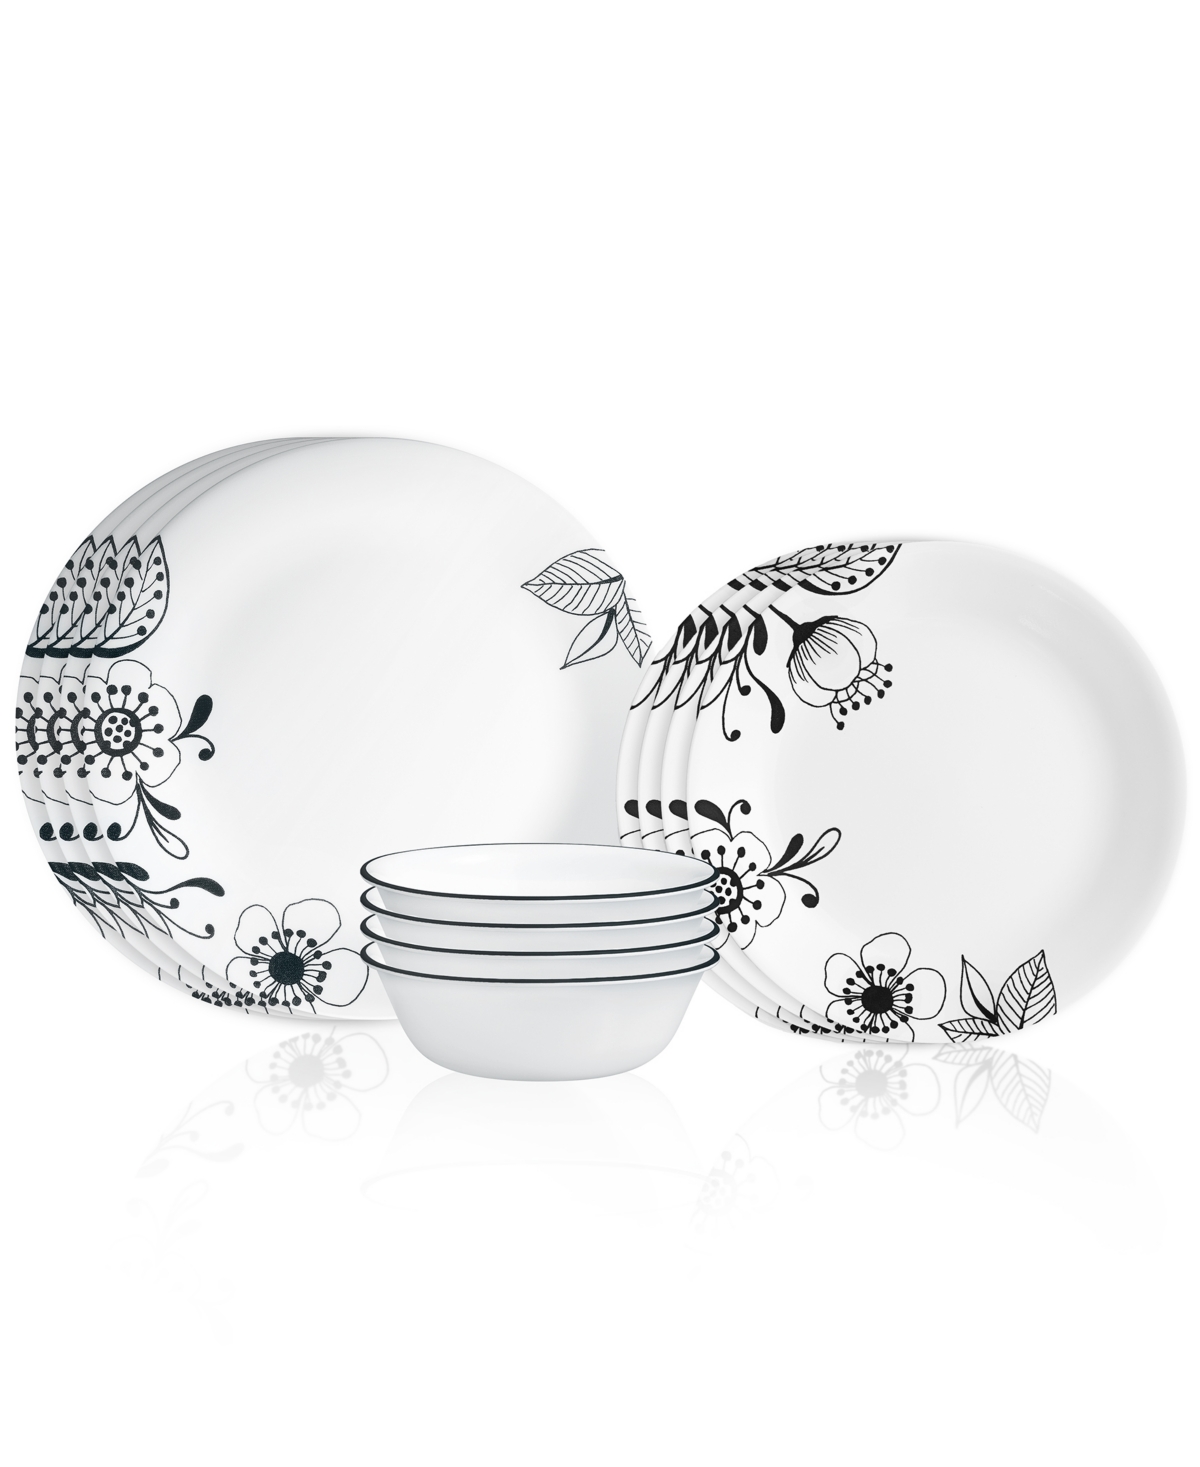 Inked Poppy 12-Piece Dinnerware Set, Service for 4 - White with Black Floral